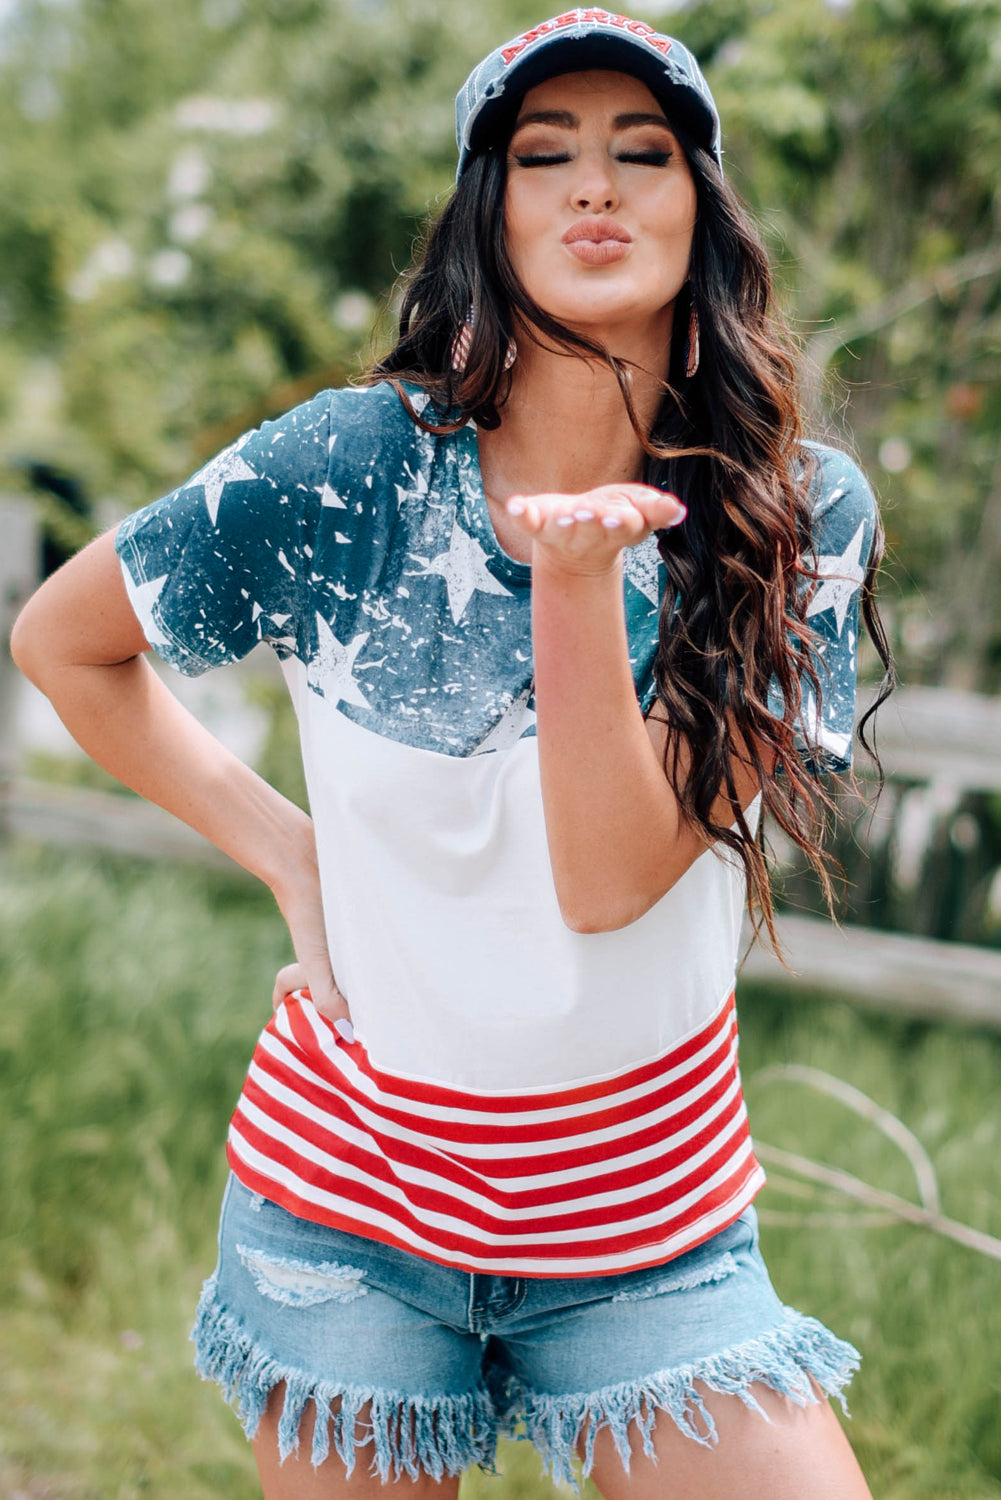 The US Stars and Stripes Inspired Top